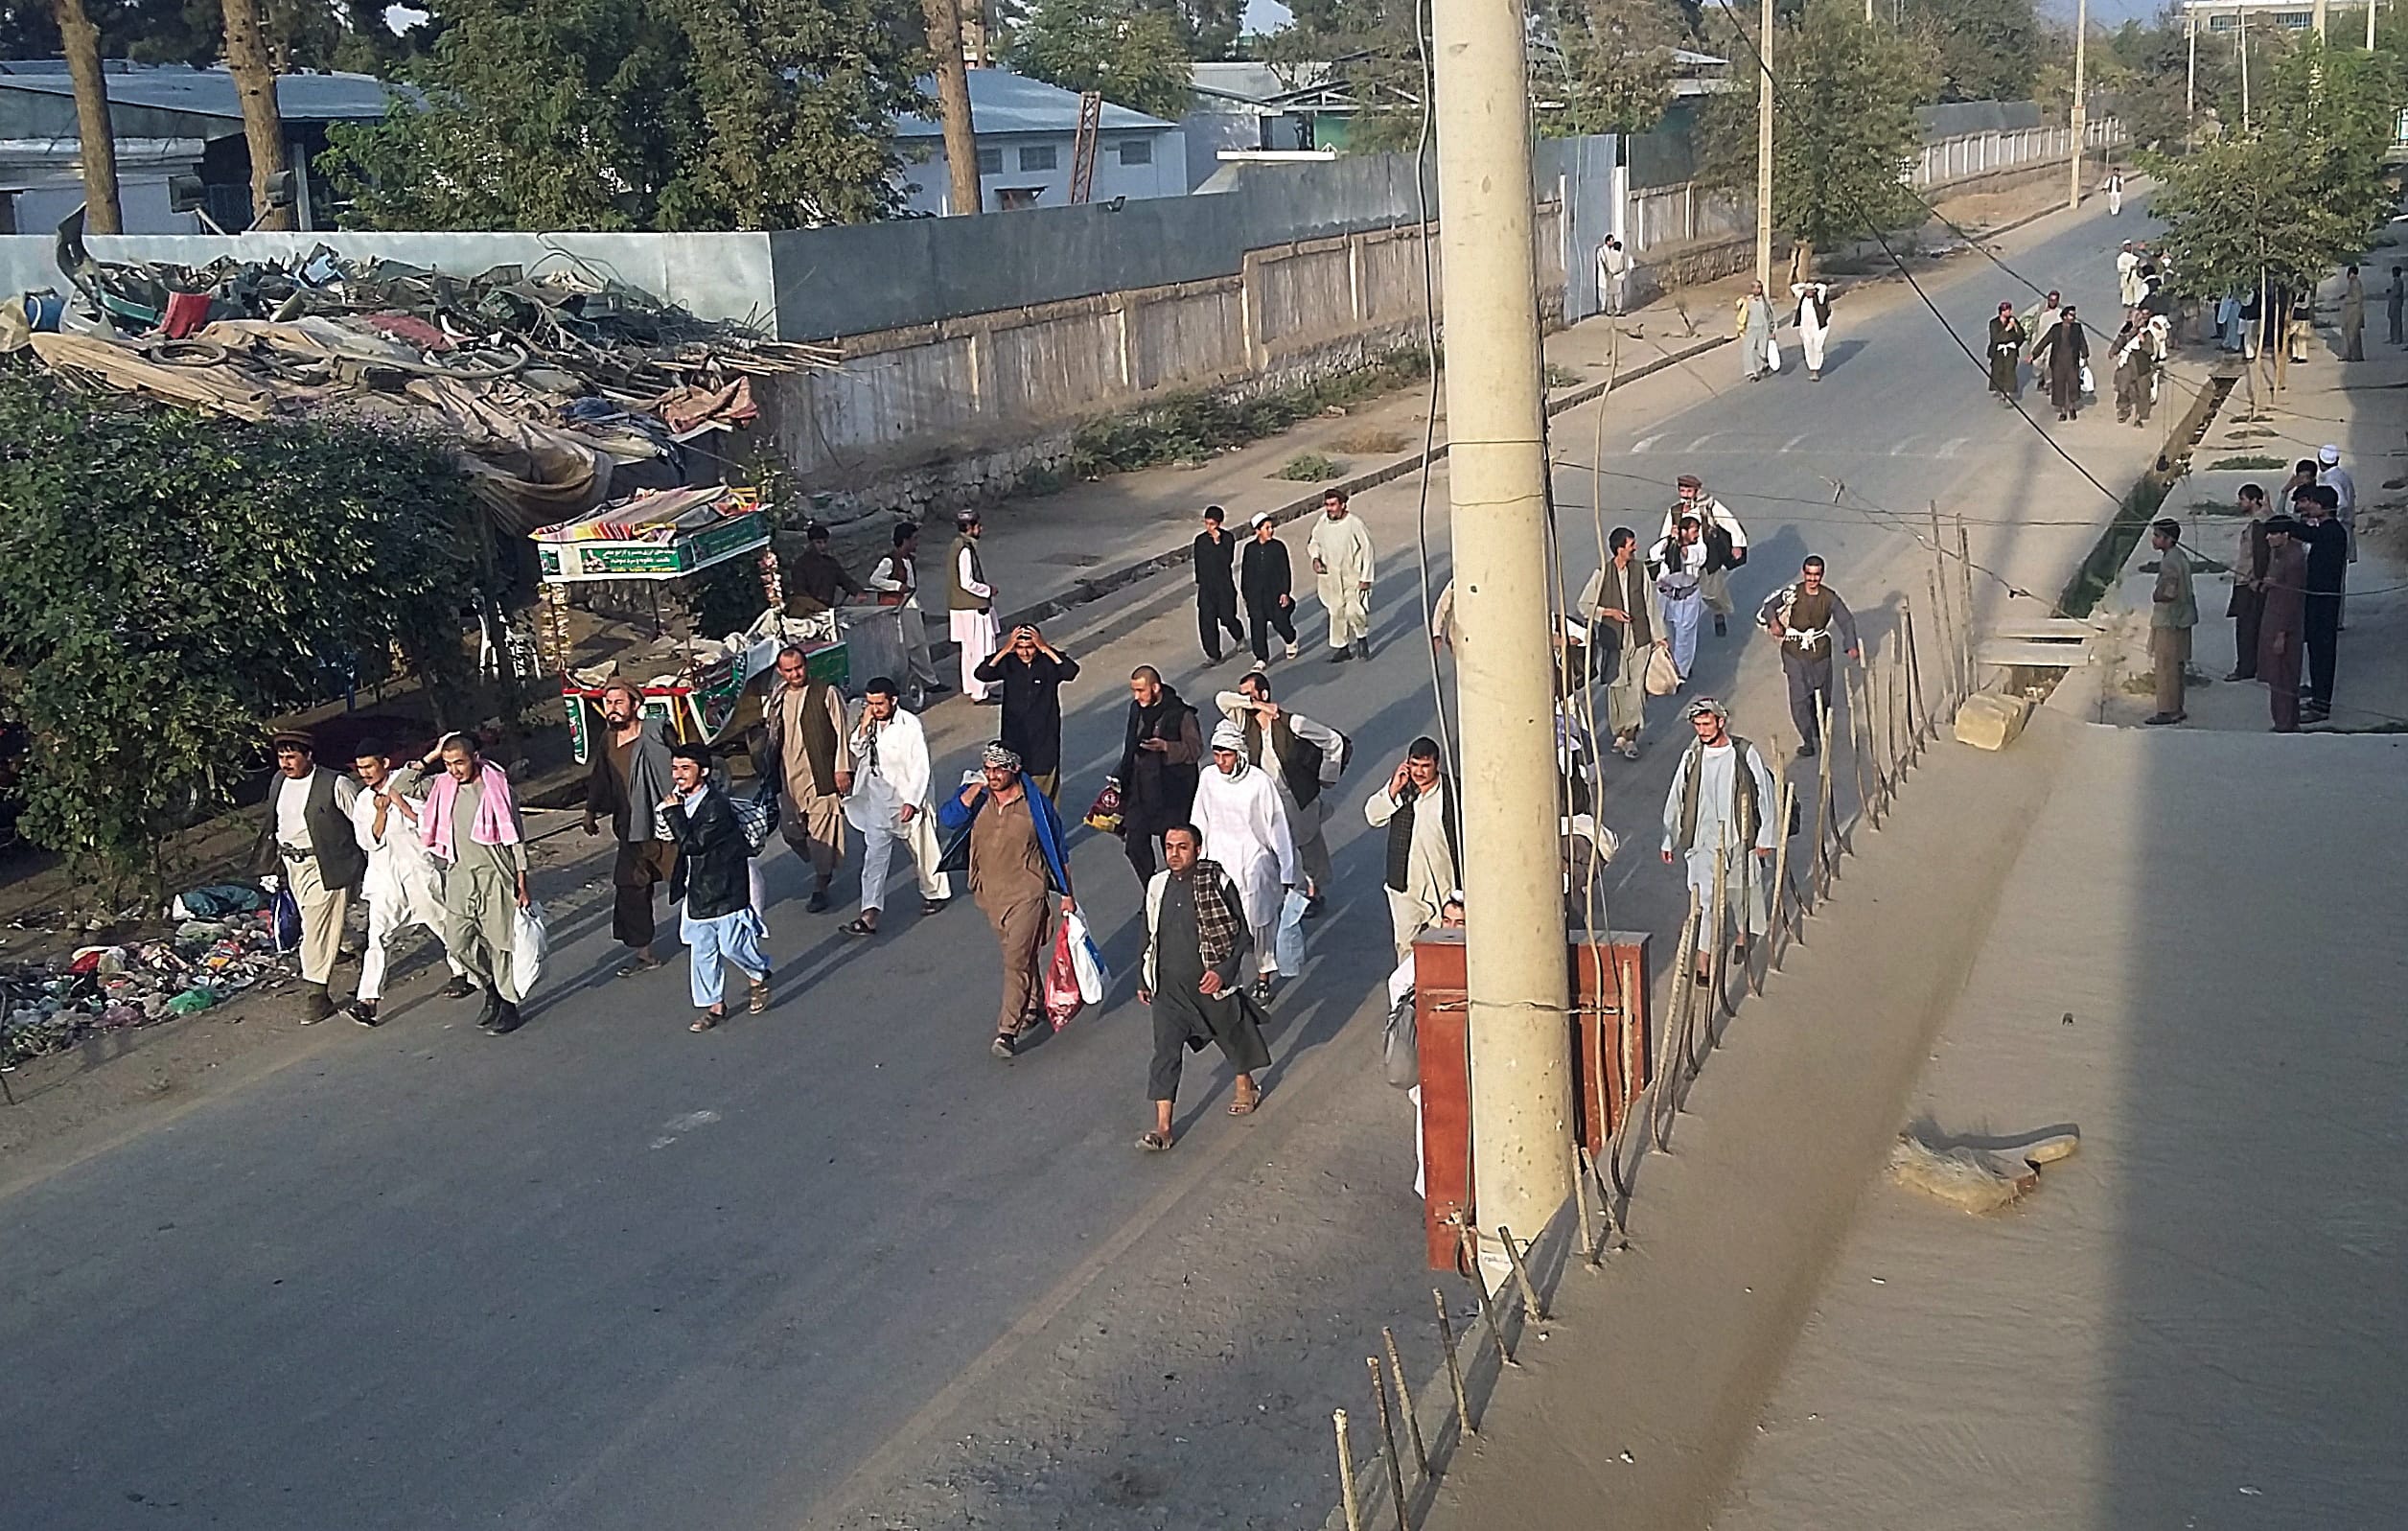 Taliban prisoners walk on a street Monday after their comrades released them from the main jail in Kunduz, north of Kabul, Afghanistan. The Taliban captured the northern Afghan city of Kunduz in a massive assault Monday involving hundreds of fighters.